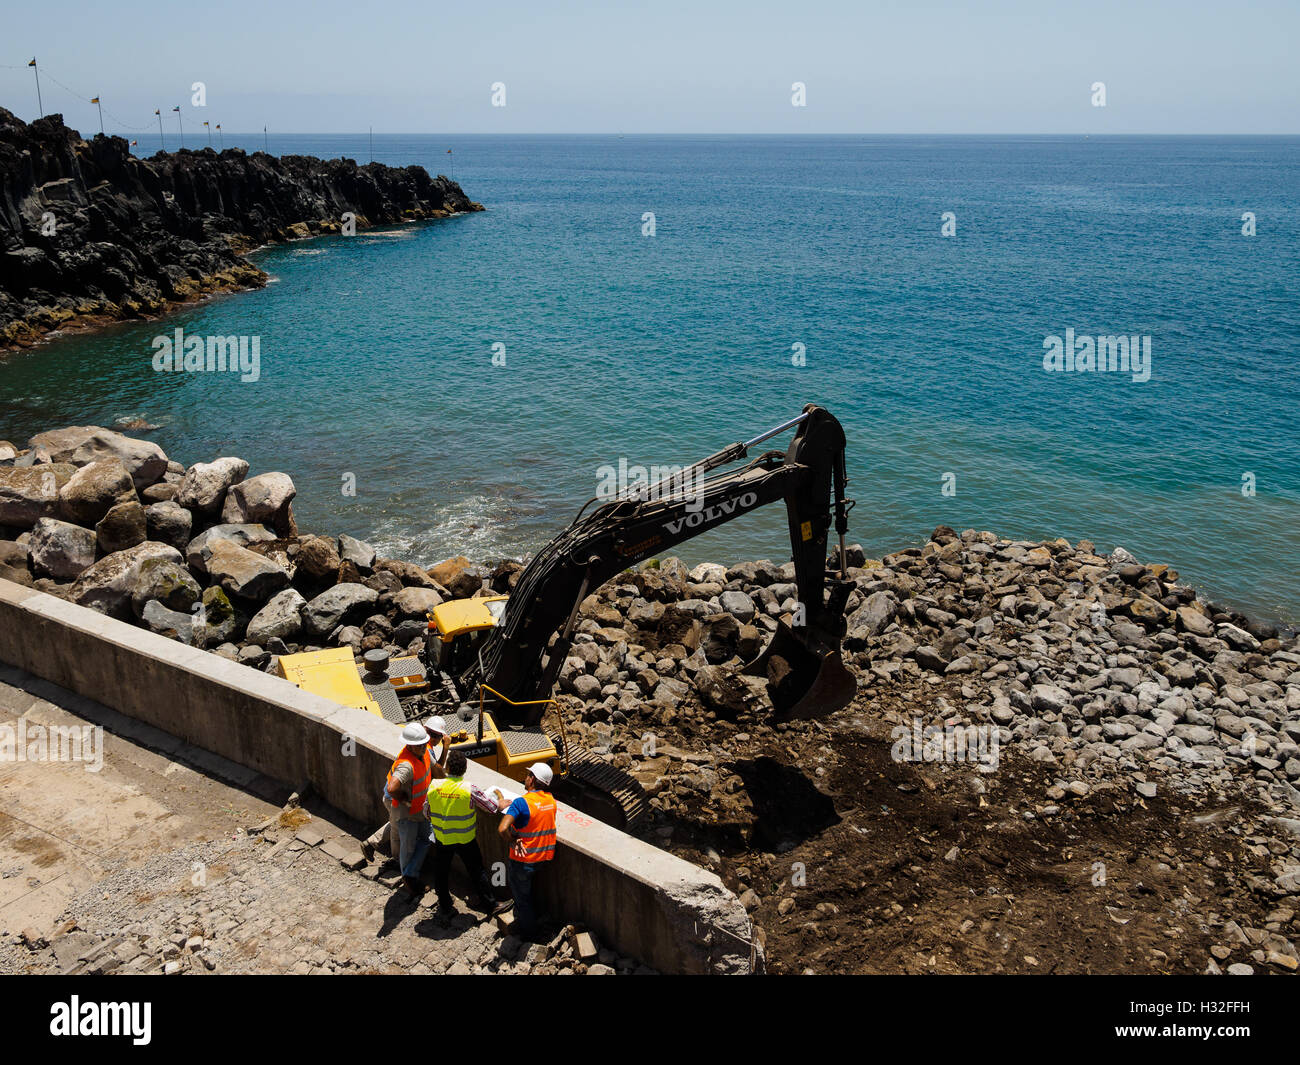 An excavator works on the shoreline stabilization at Camara de Lobos on the Portuguese island of Madeira Stock Photo